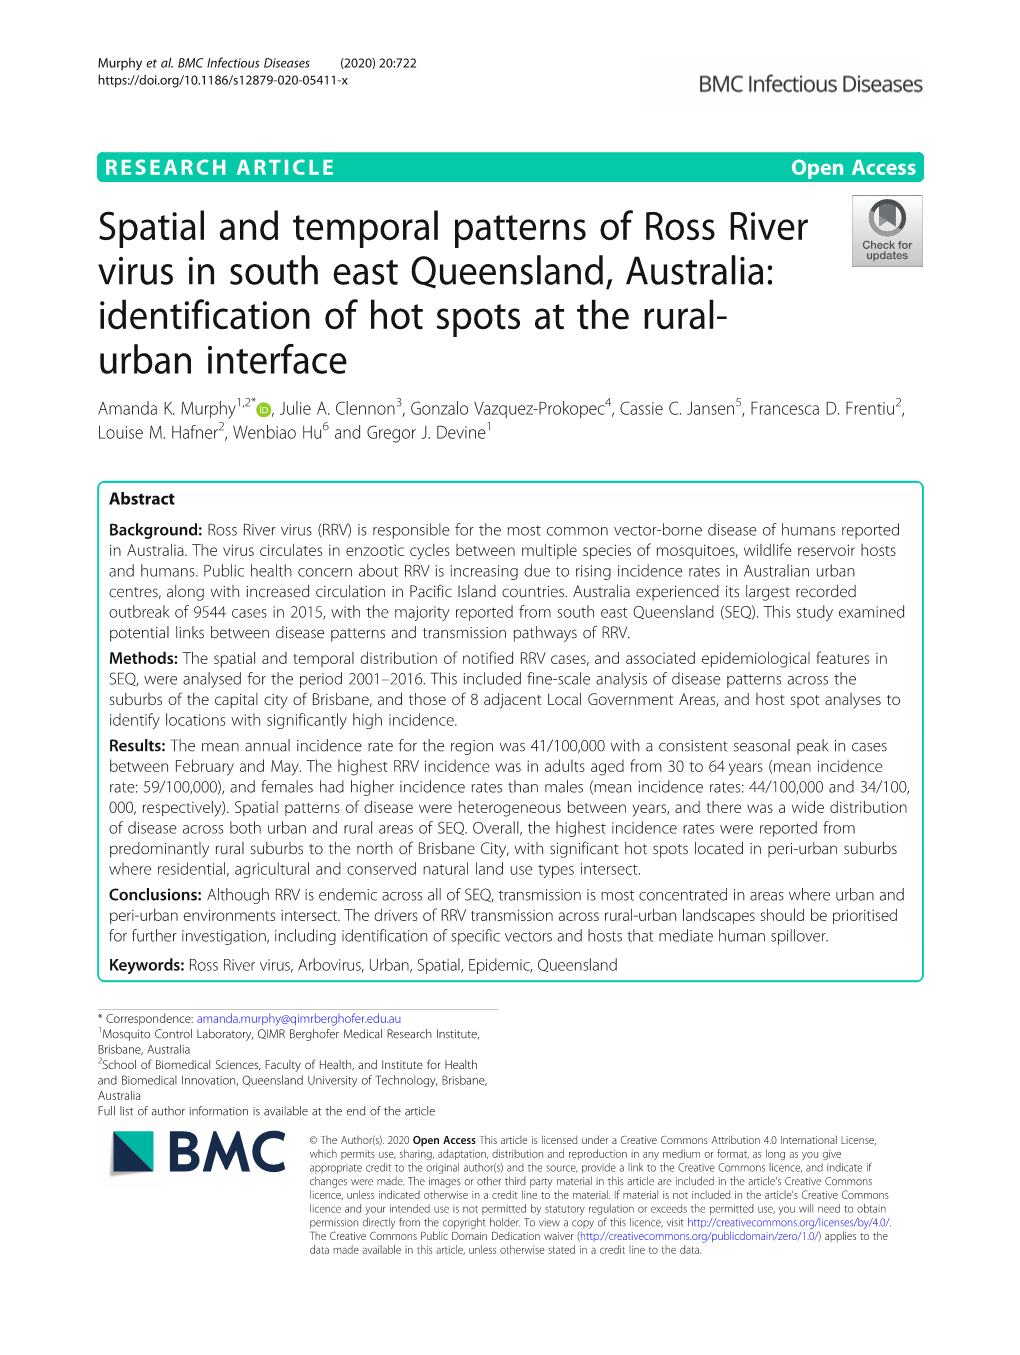 Spatial and Temporal Patterns of Ross River Virus in South East Queensland, Australia: Identification of Hot Spots at the Rural- Urban Interface Amanda K